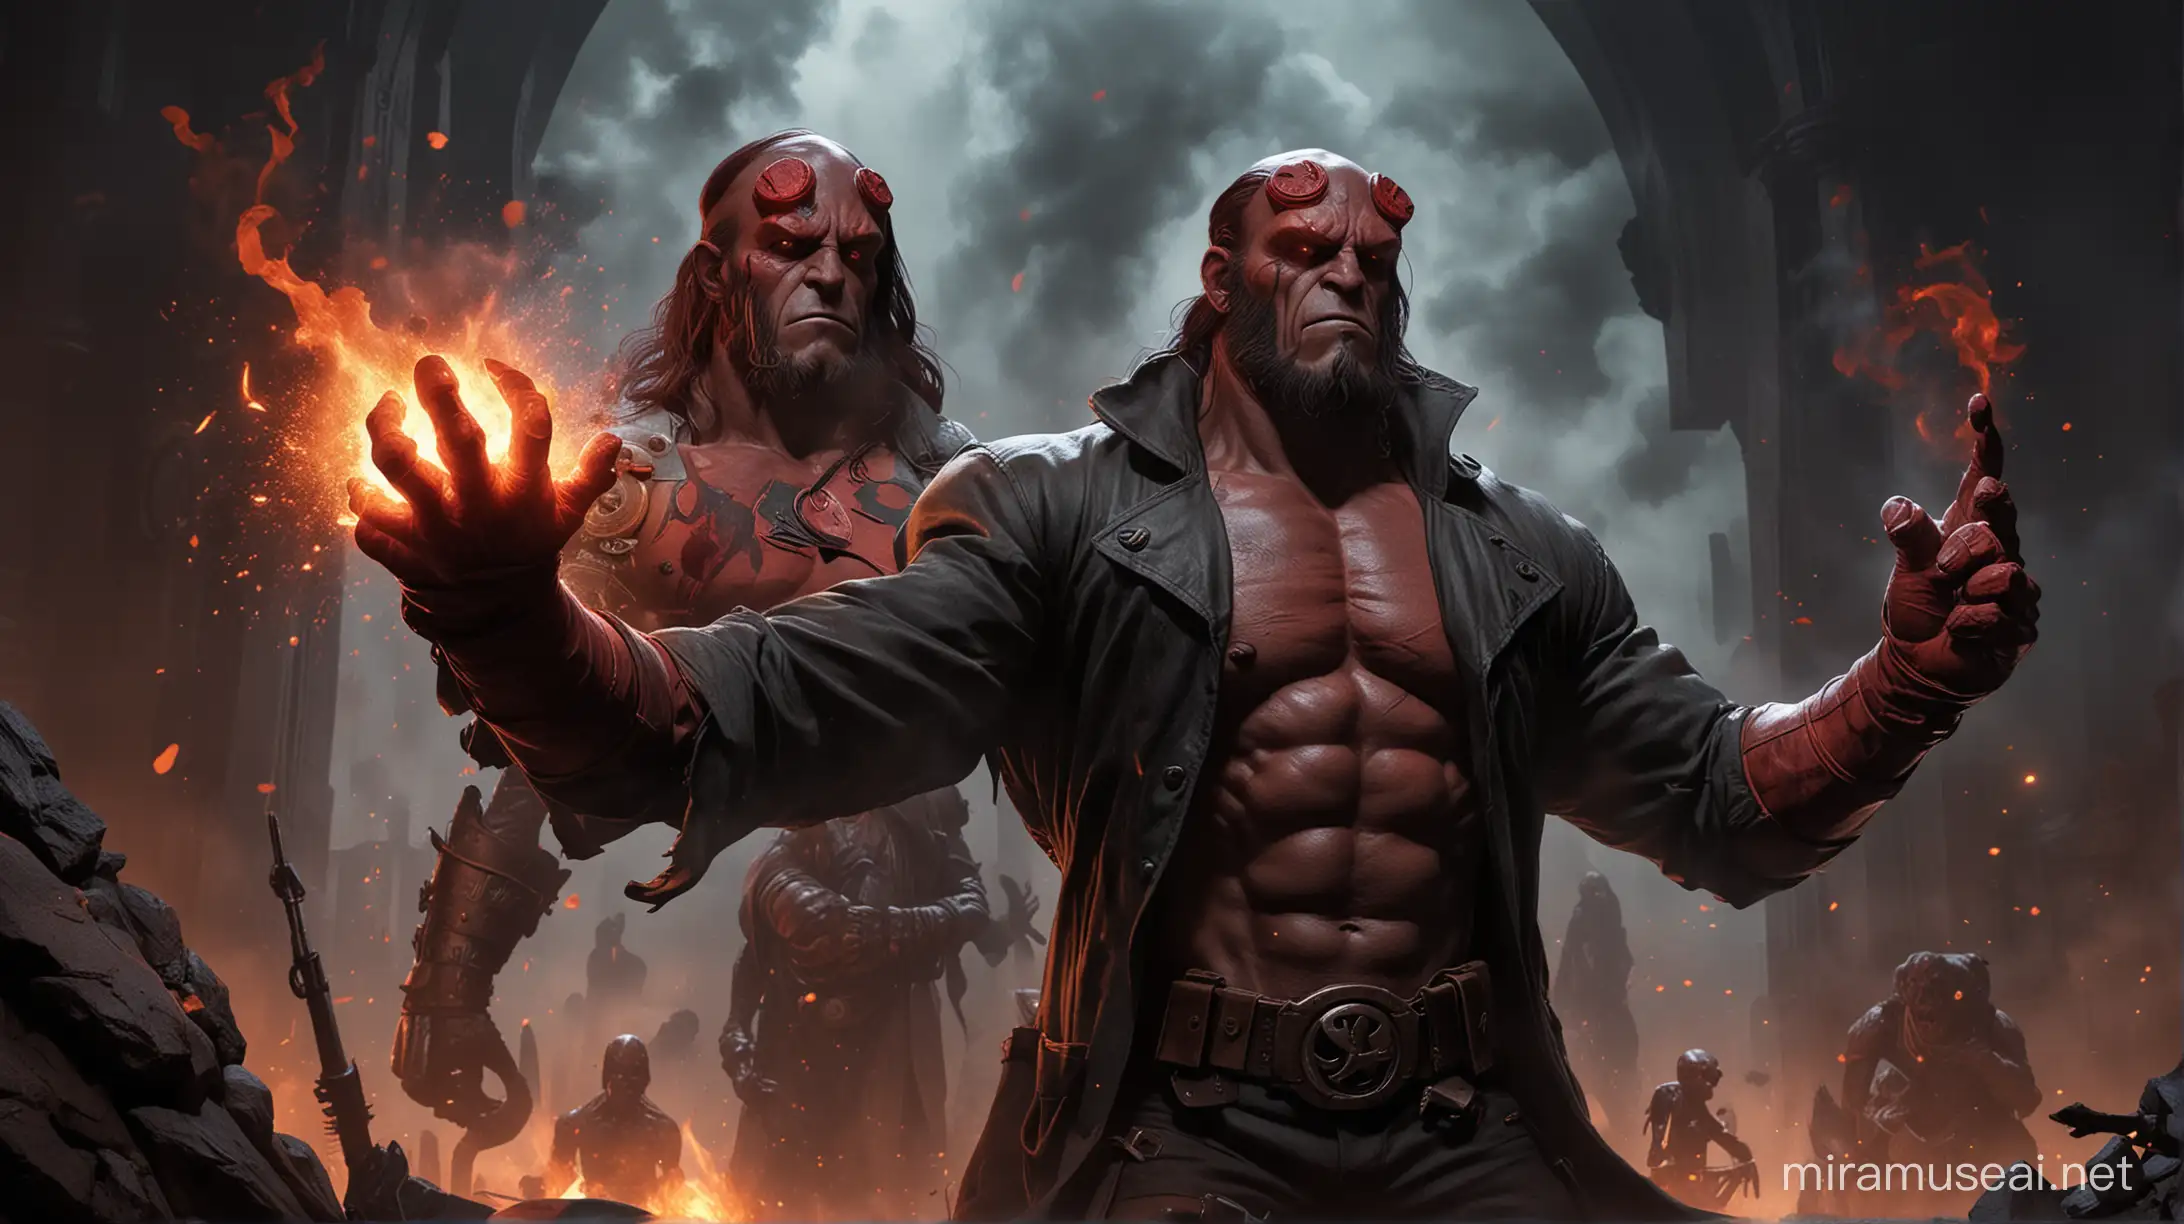 Hellboy in Fiery Action Featuring Iconic Characters and Supernatural Elements